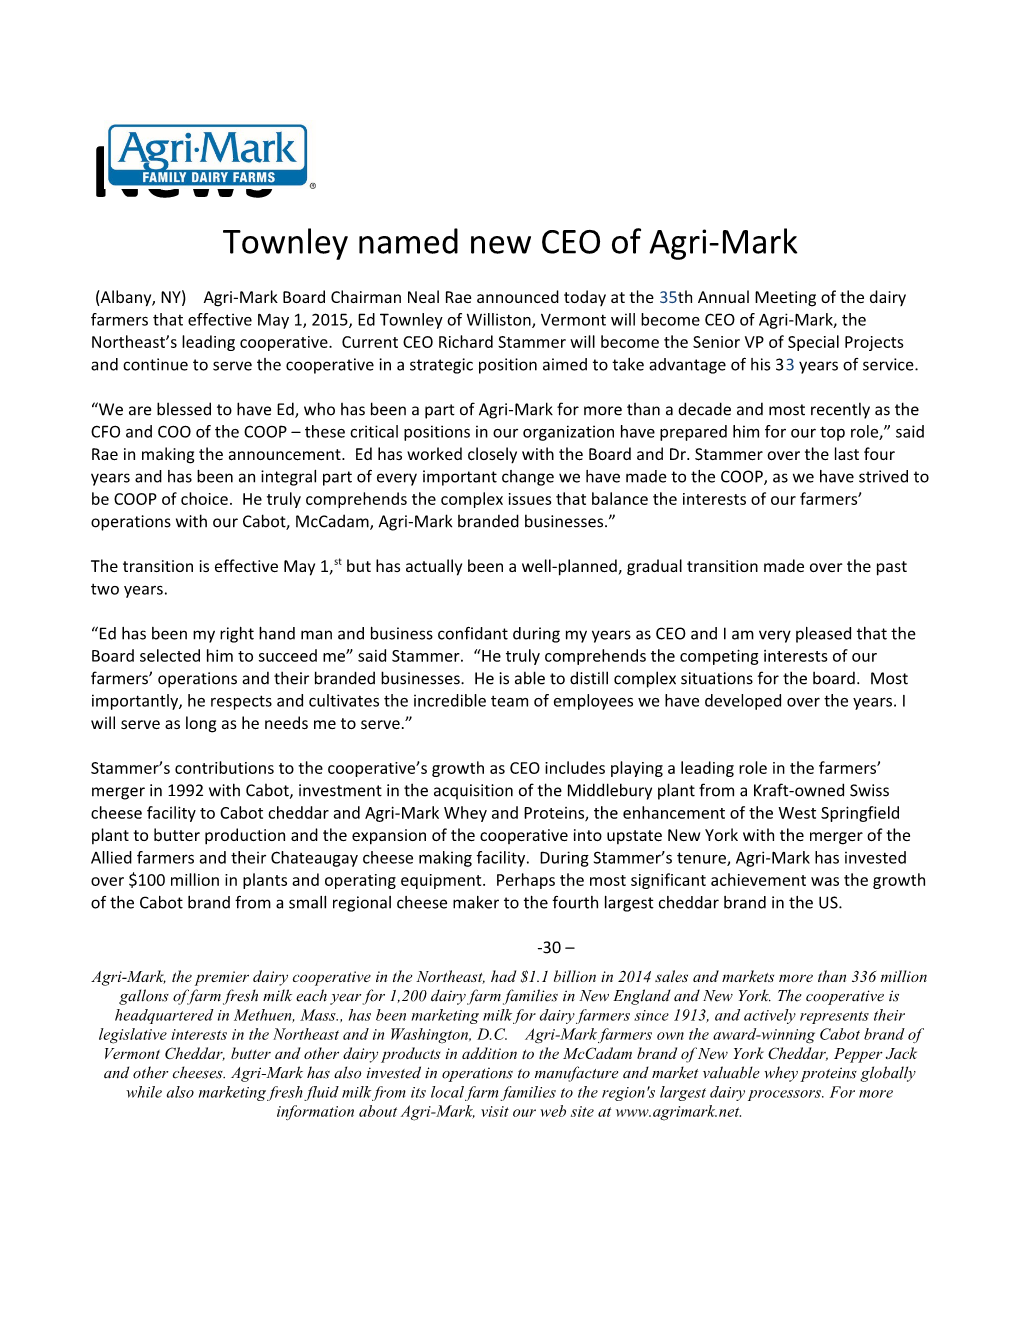 Townley Named New CEO of Agri-Mark